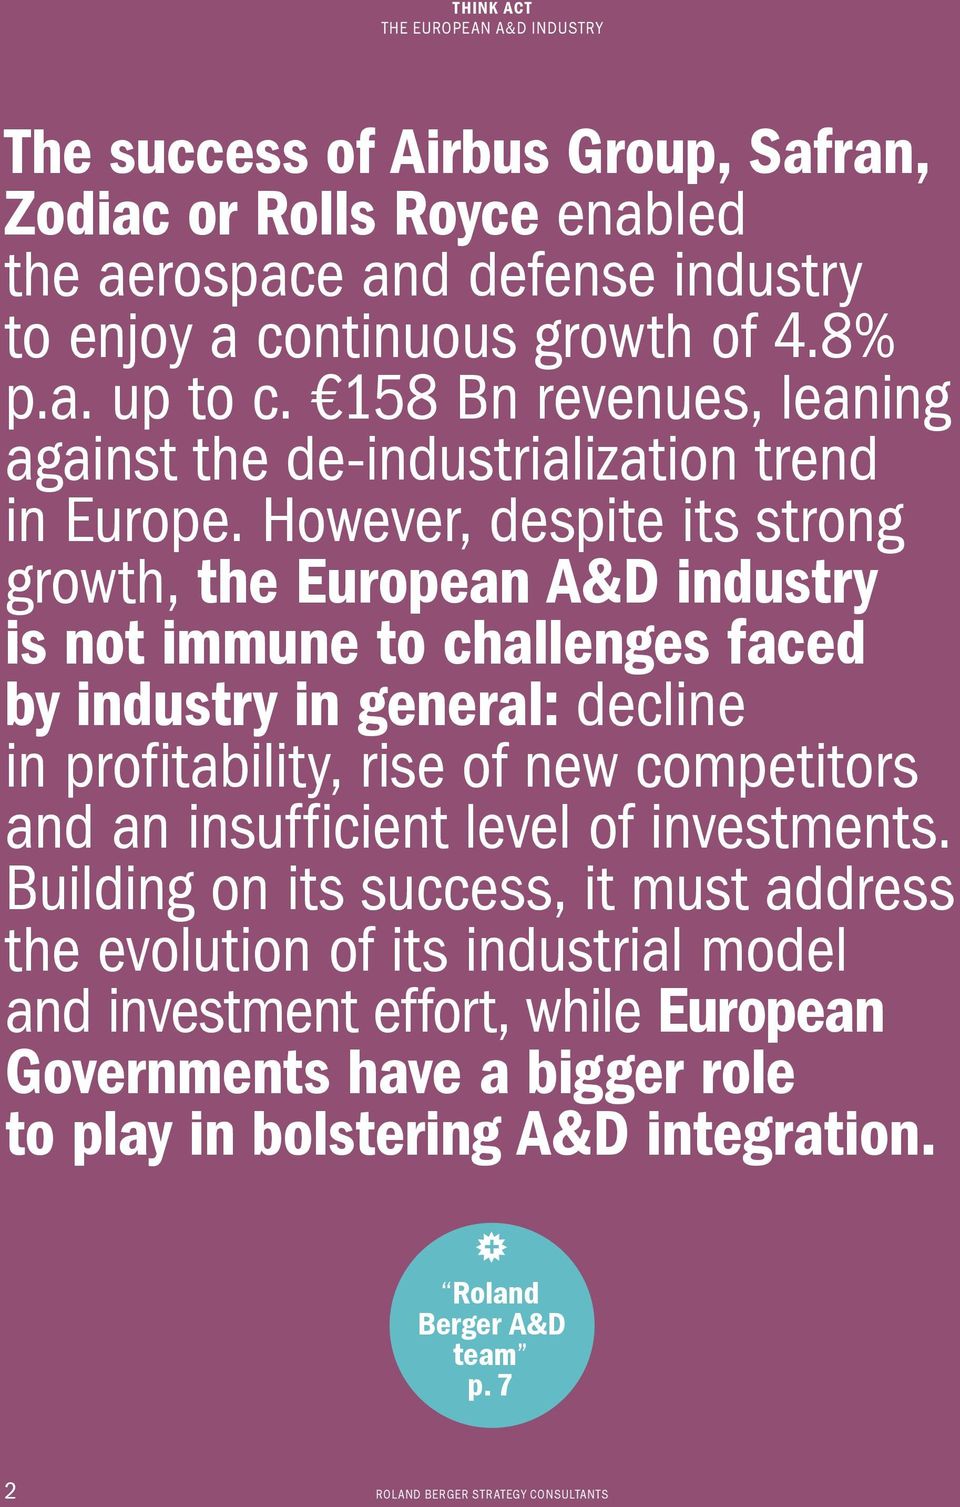 However, despite its strong growth, the European A&D industry is not immune to challenges faced by industry in general: decline in profitability, rise of new